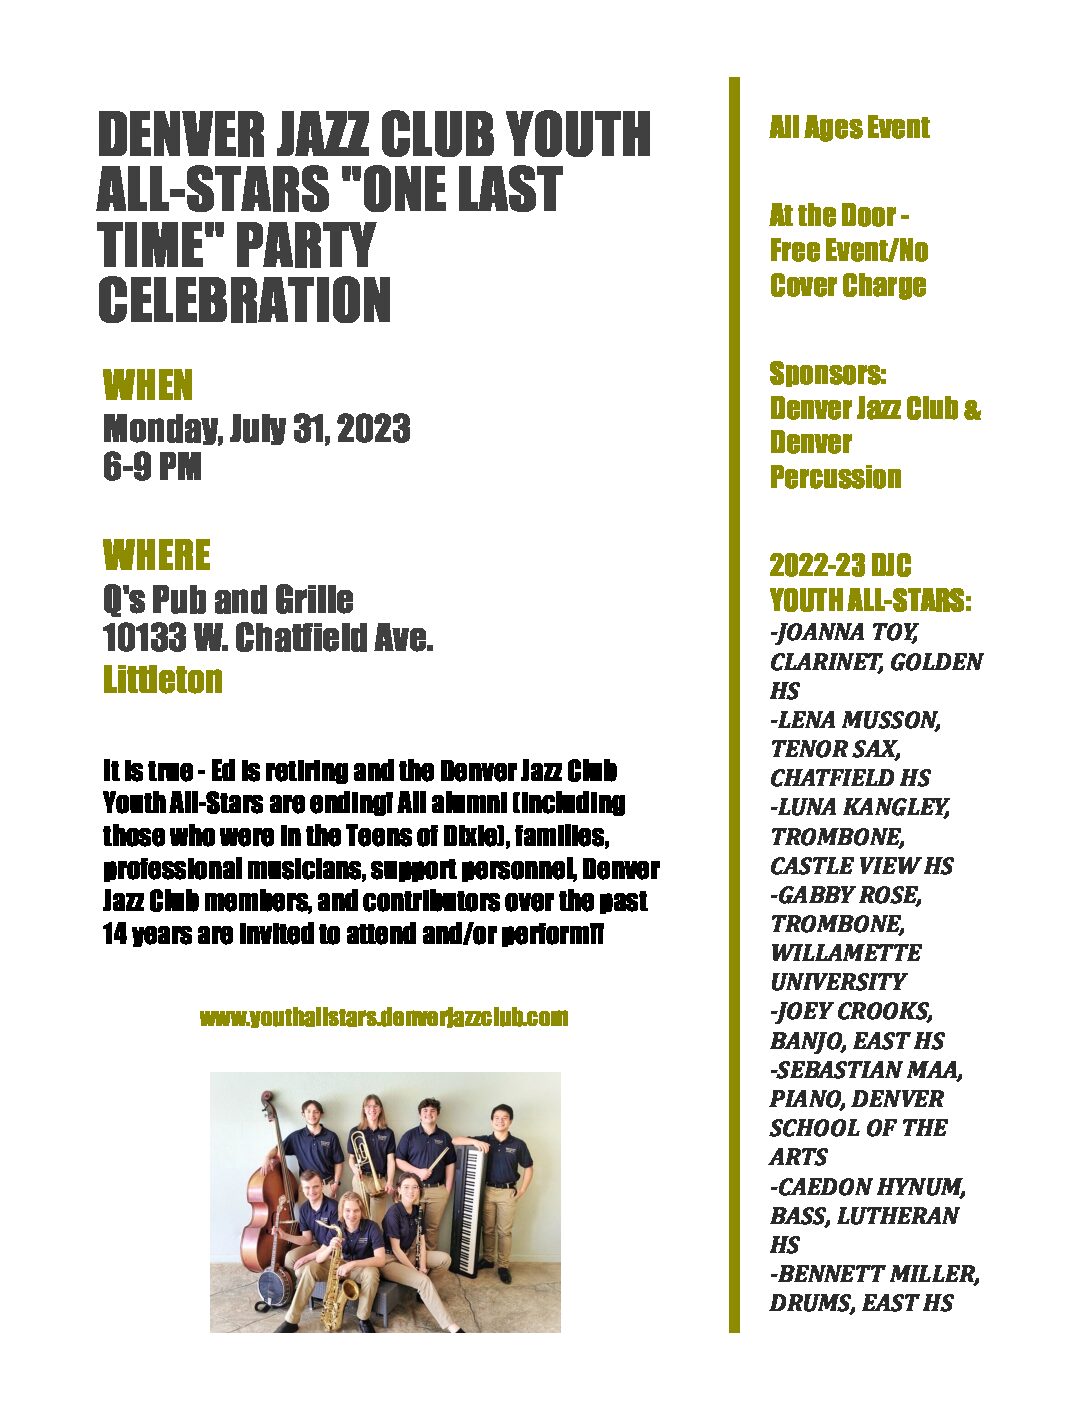 FINAL REMINDER THAT IN A WEEK WE WILL HAVE OUR DENVER JAZZ CLUB YOUTH ALL-STARS “ONE LAST TIME” PERFORMANCE/PARTY CELEBRATION!!!!